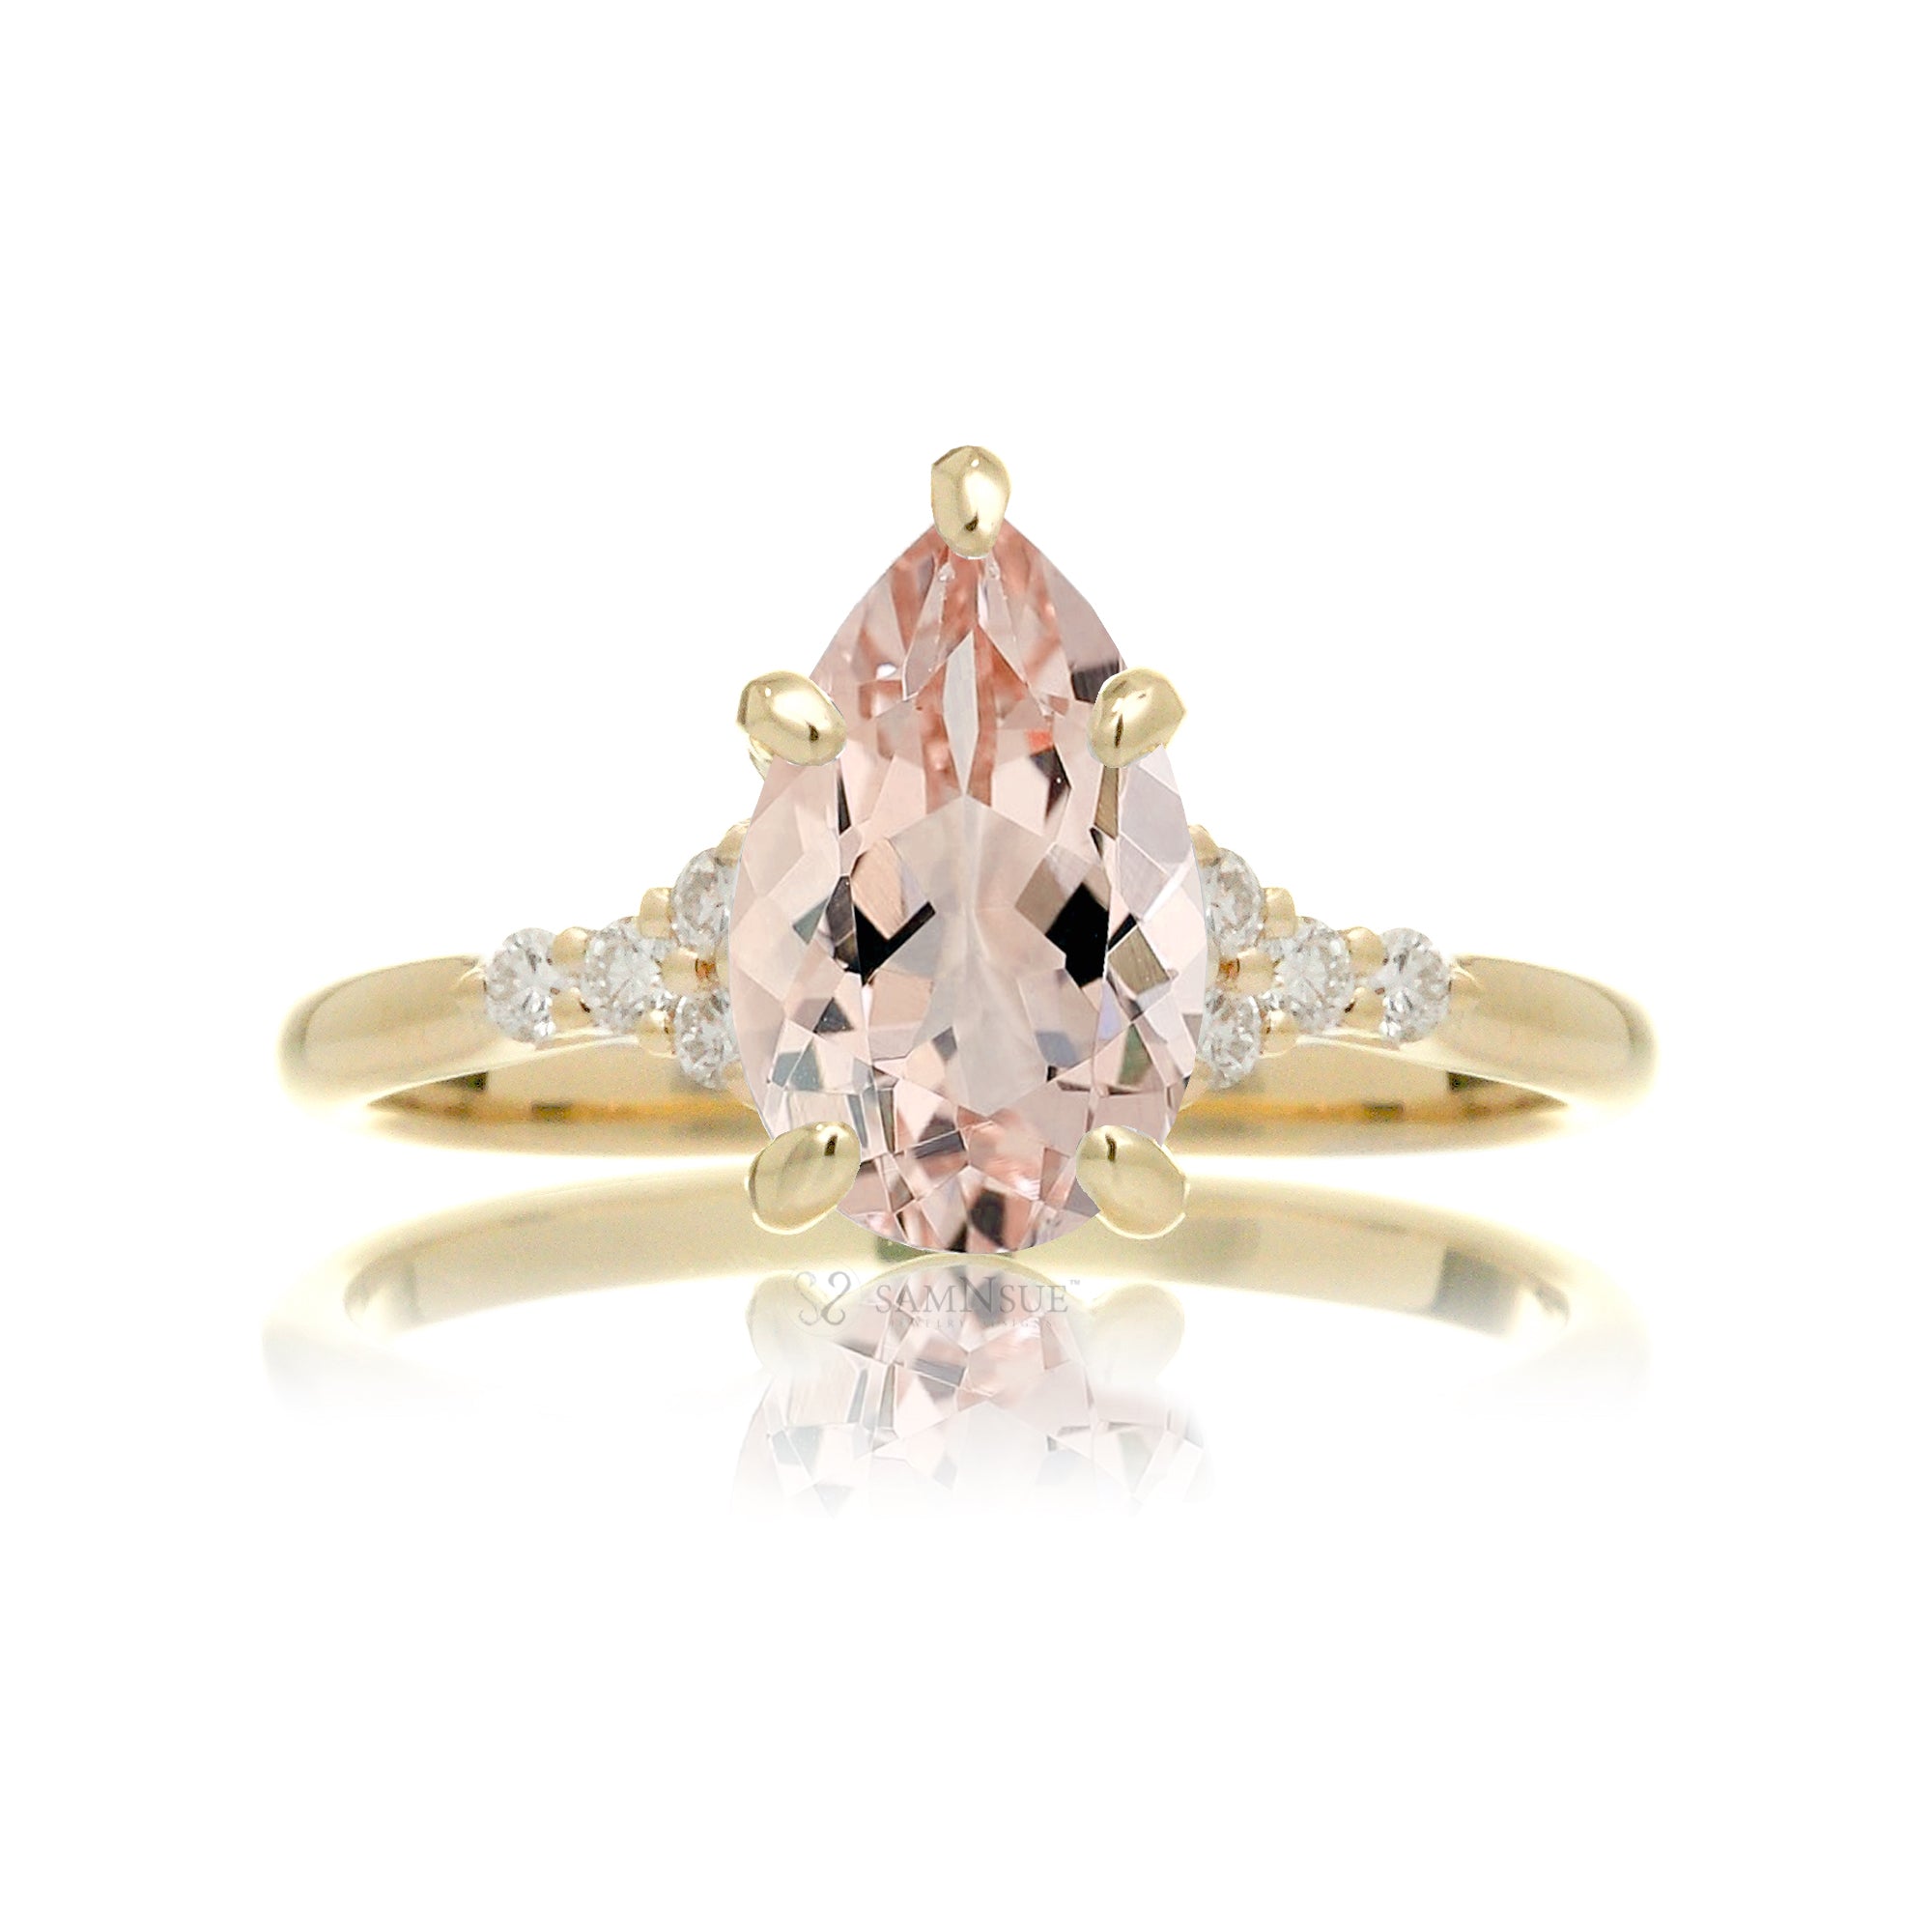 Pear cut natural morganite and diamond engagement ring in yellow gold - the Chloe